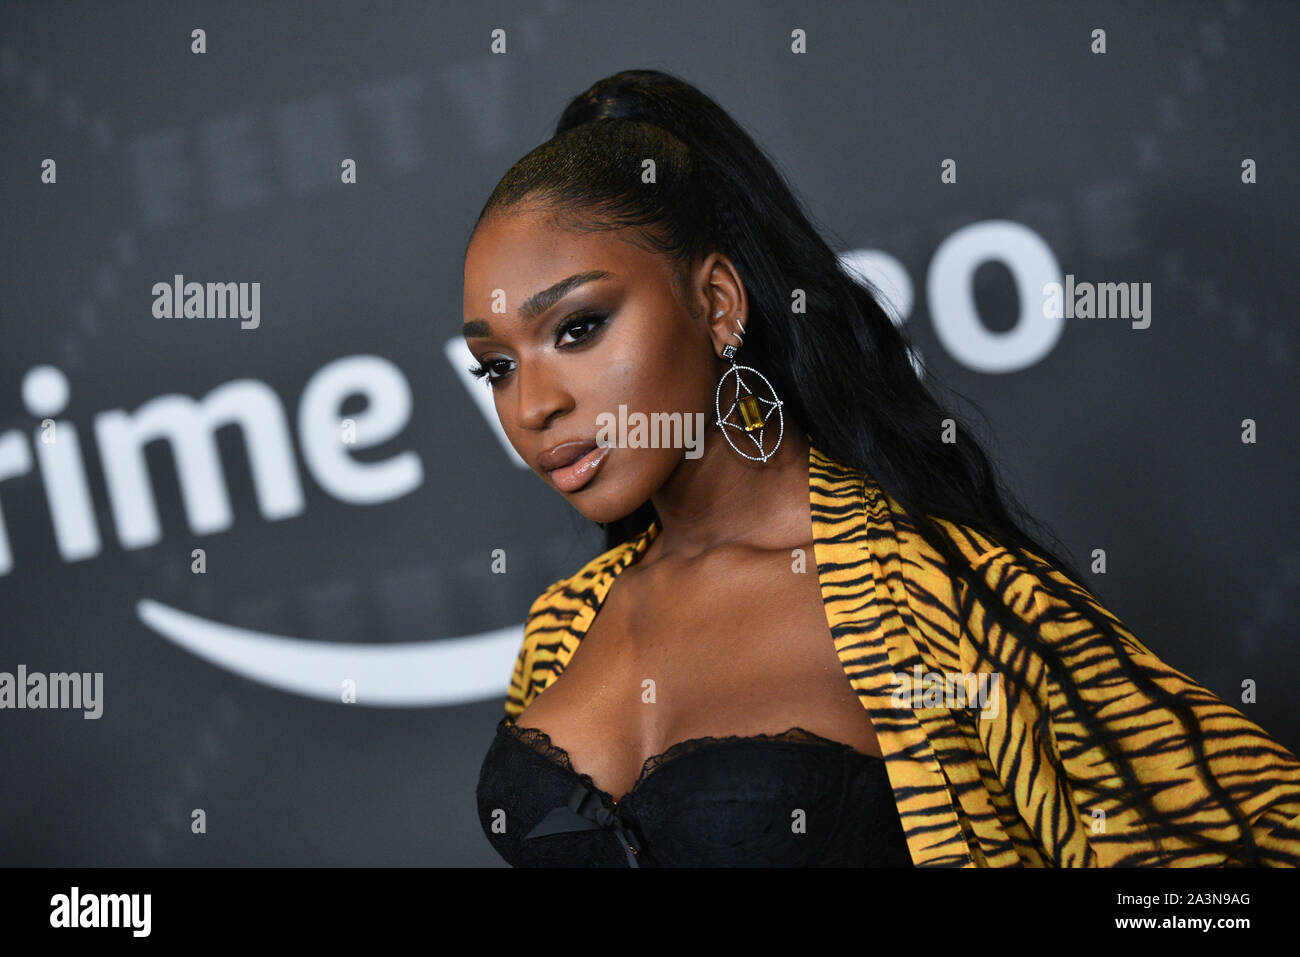 Normani attends the Savage x Fenty arrivals during New York Fashion Week at Barclays Center on September 10, 2019 in New York City. Stock Photo